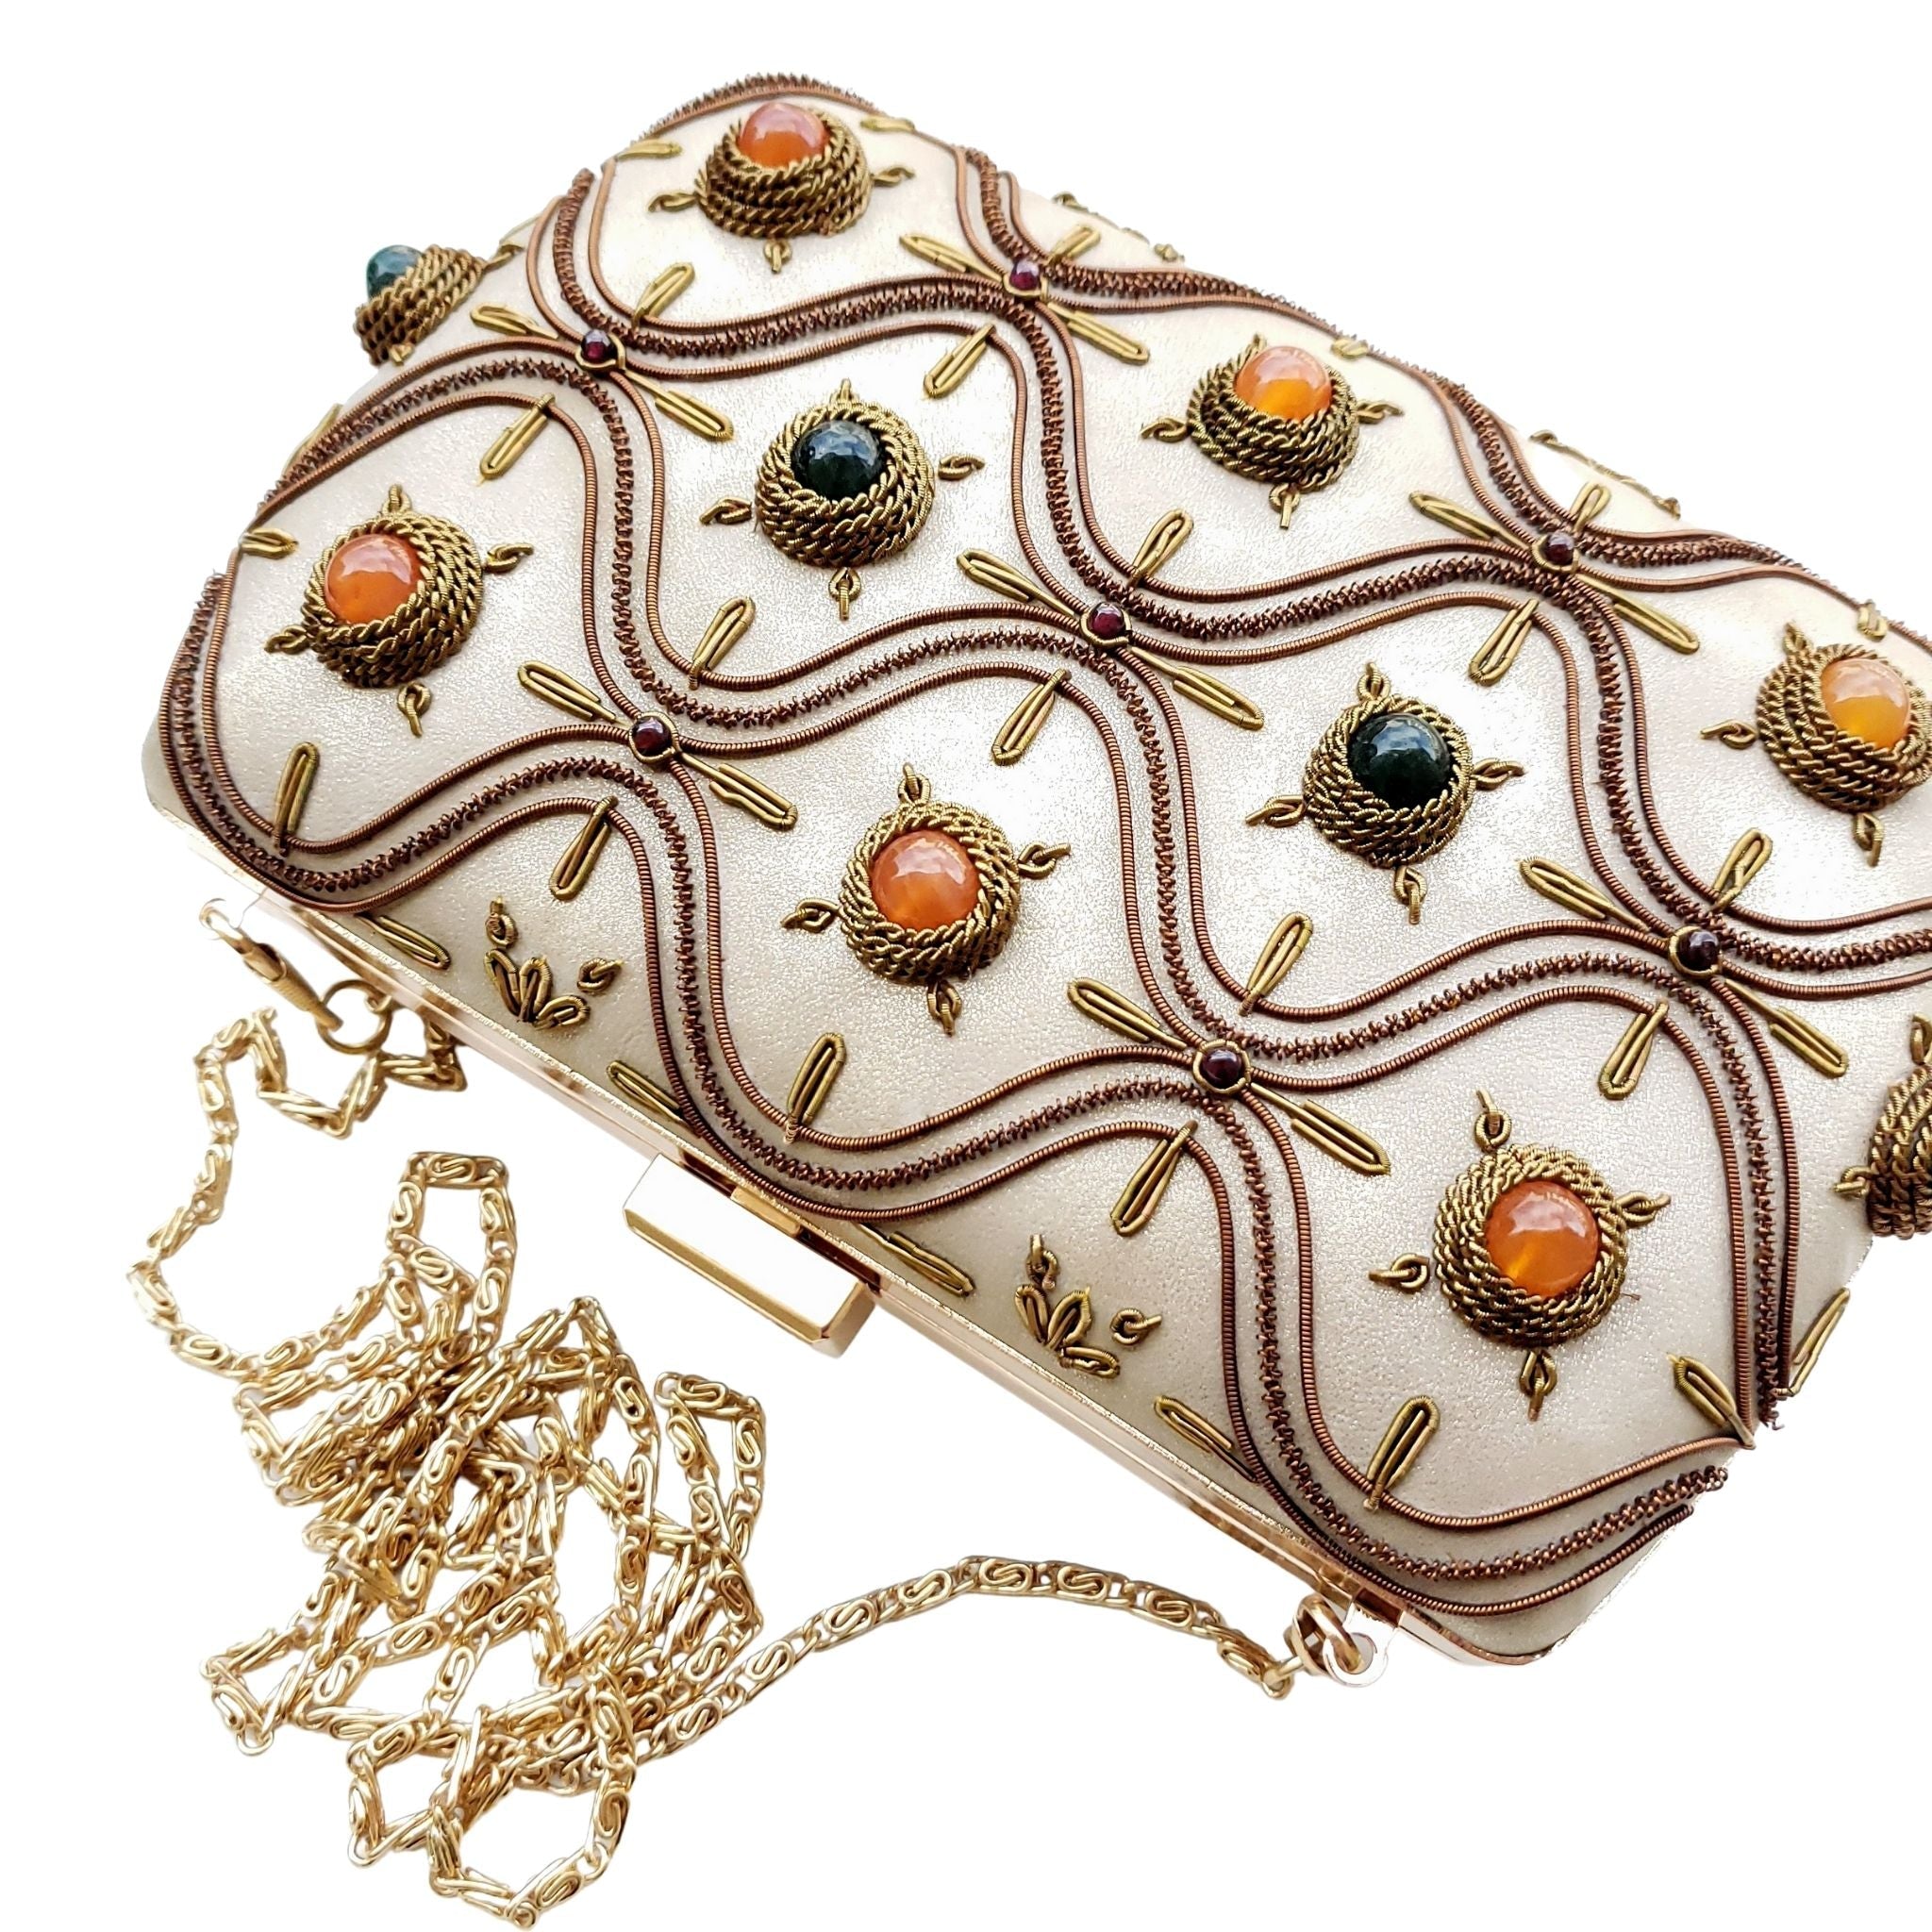 Beaded Brown and golden Embroidered Fashion Clutch Bags BR 25, For